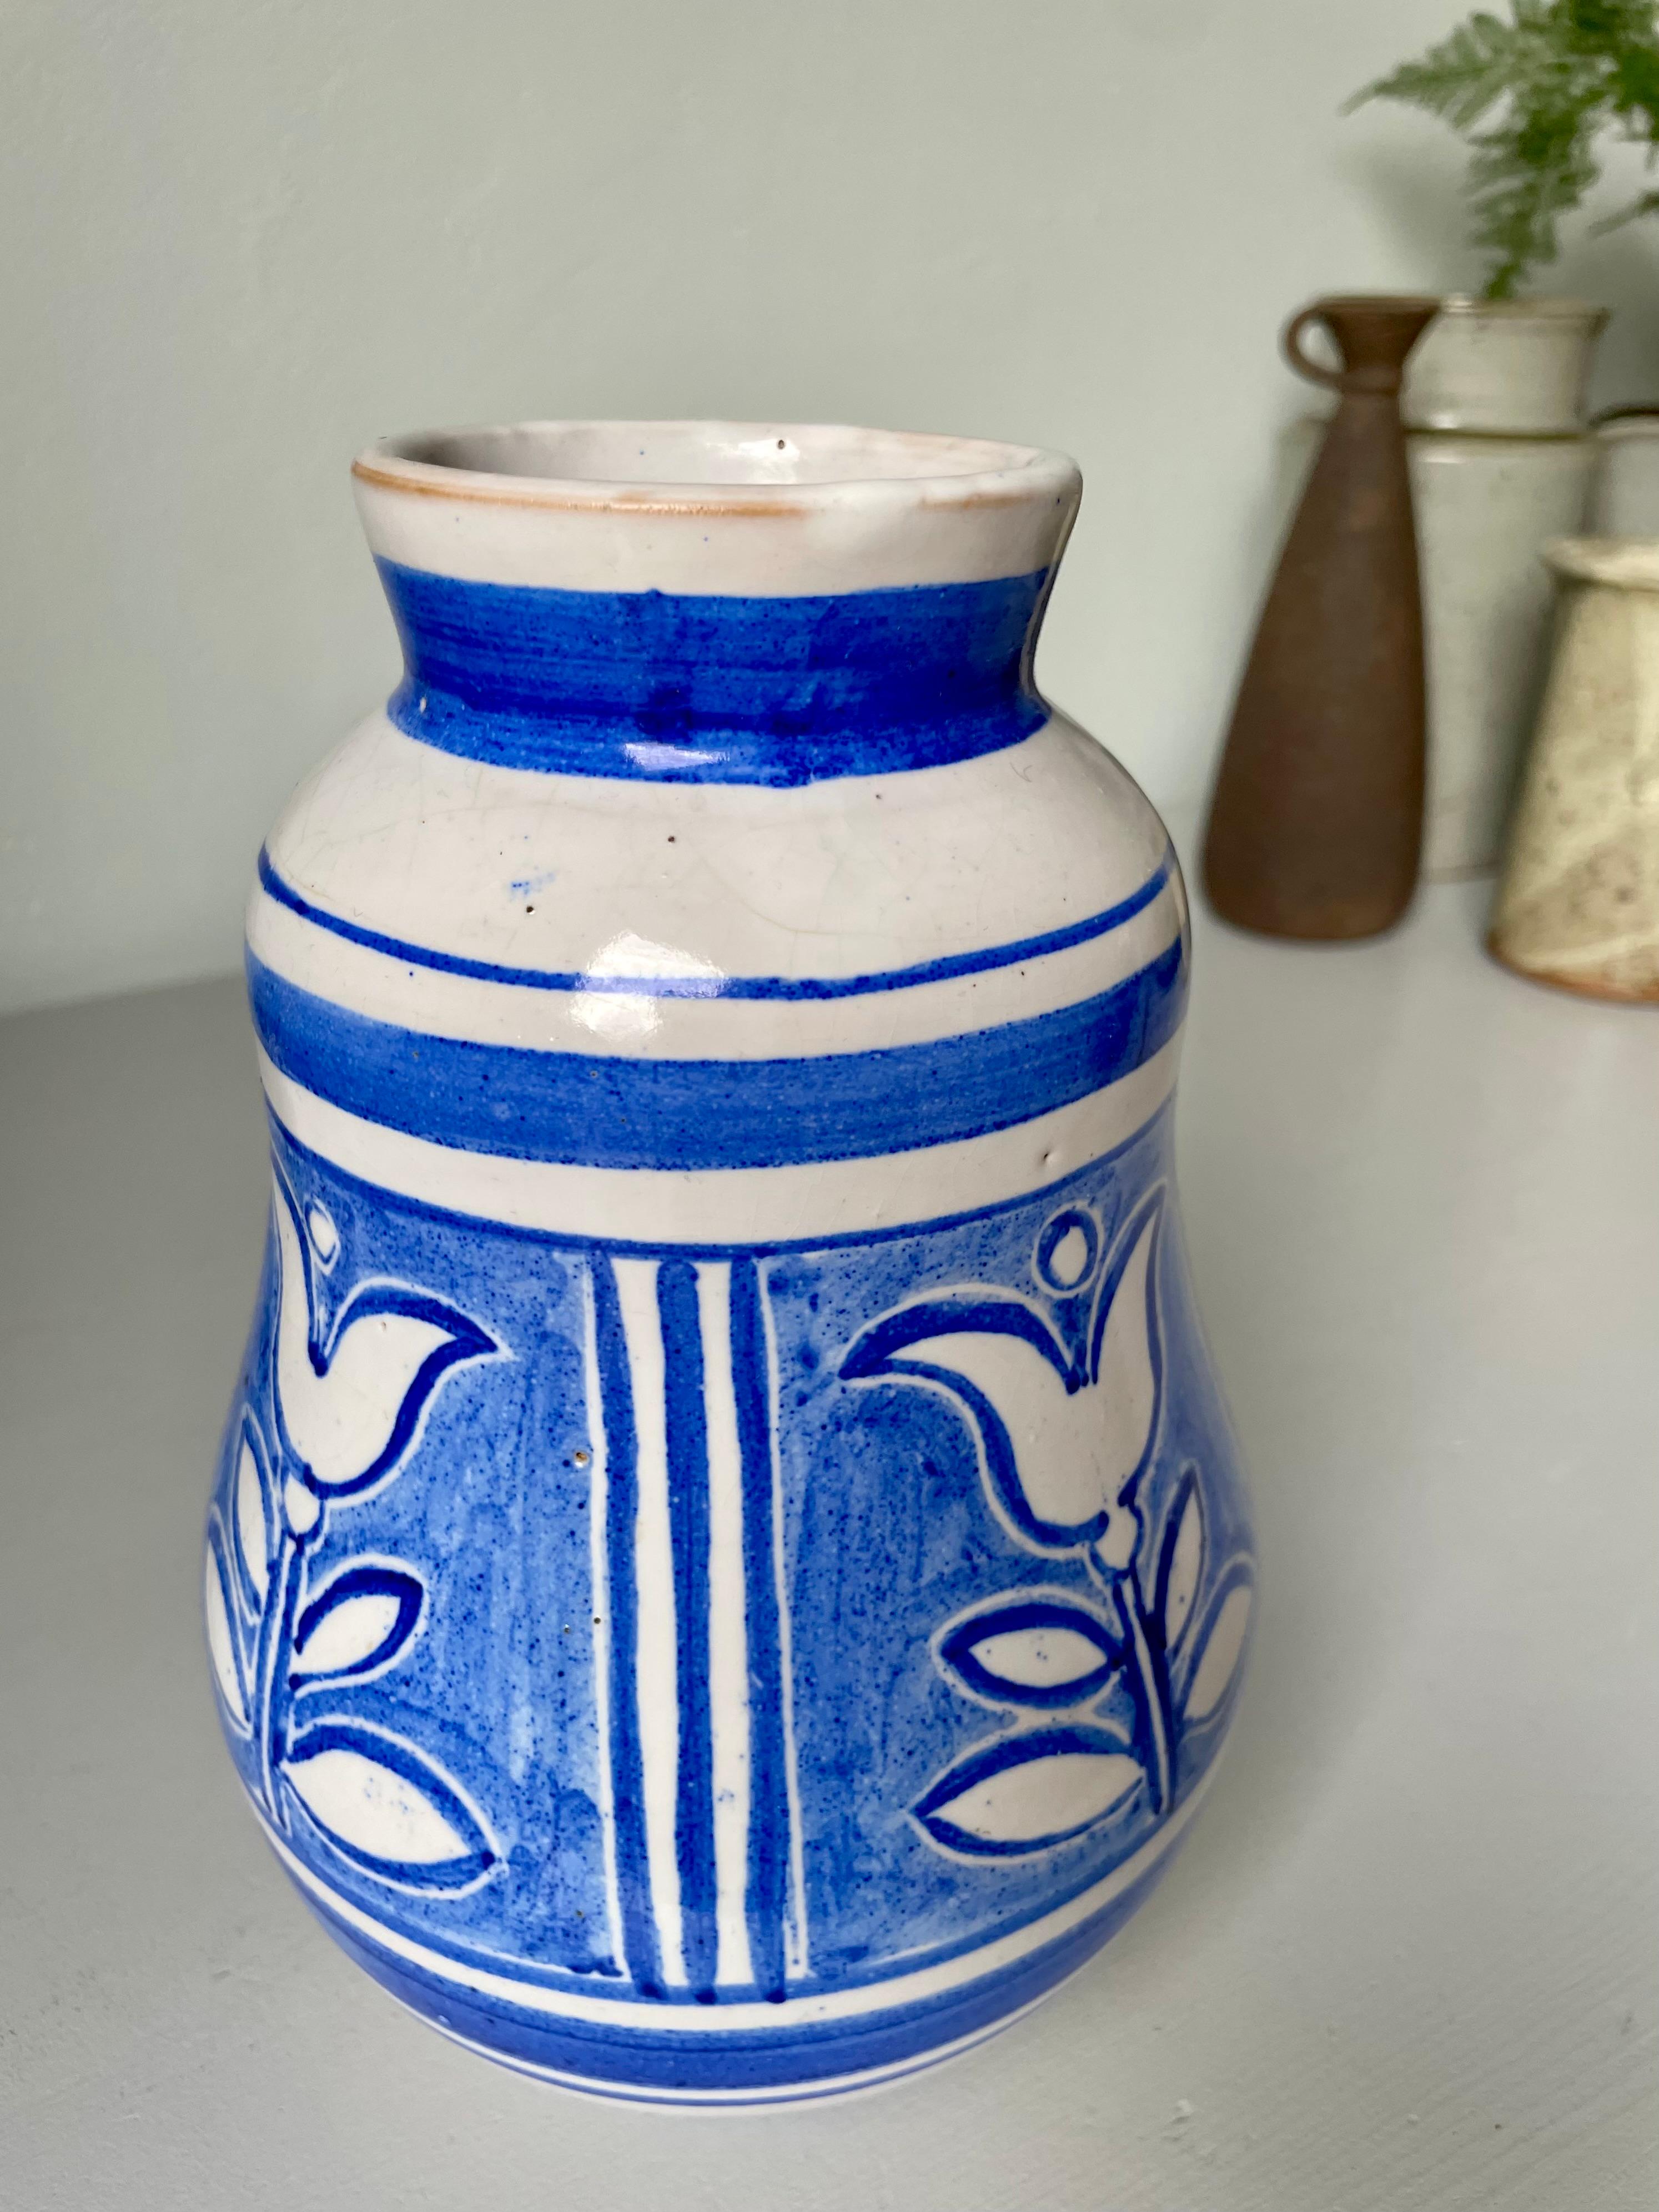 Nordic White Hand-Decorated Blue Floral Ceramic Vase, 1950s For Sale 4